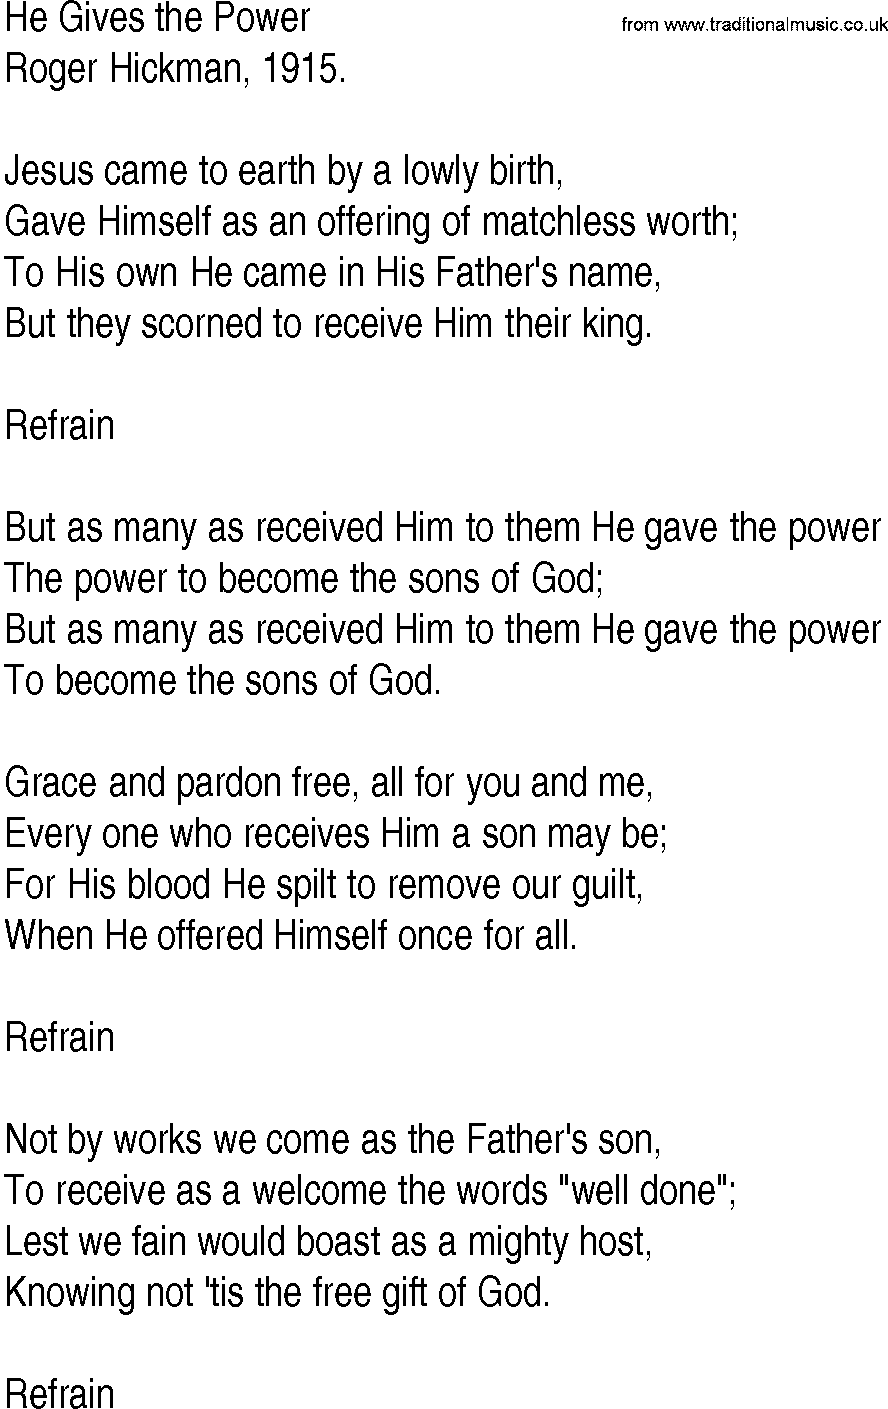 Hymn and Gospel Song: He Gives the Power by Roger Hickman lyrics